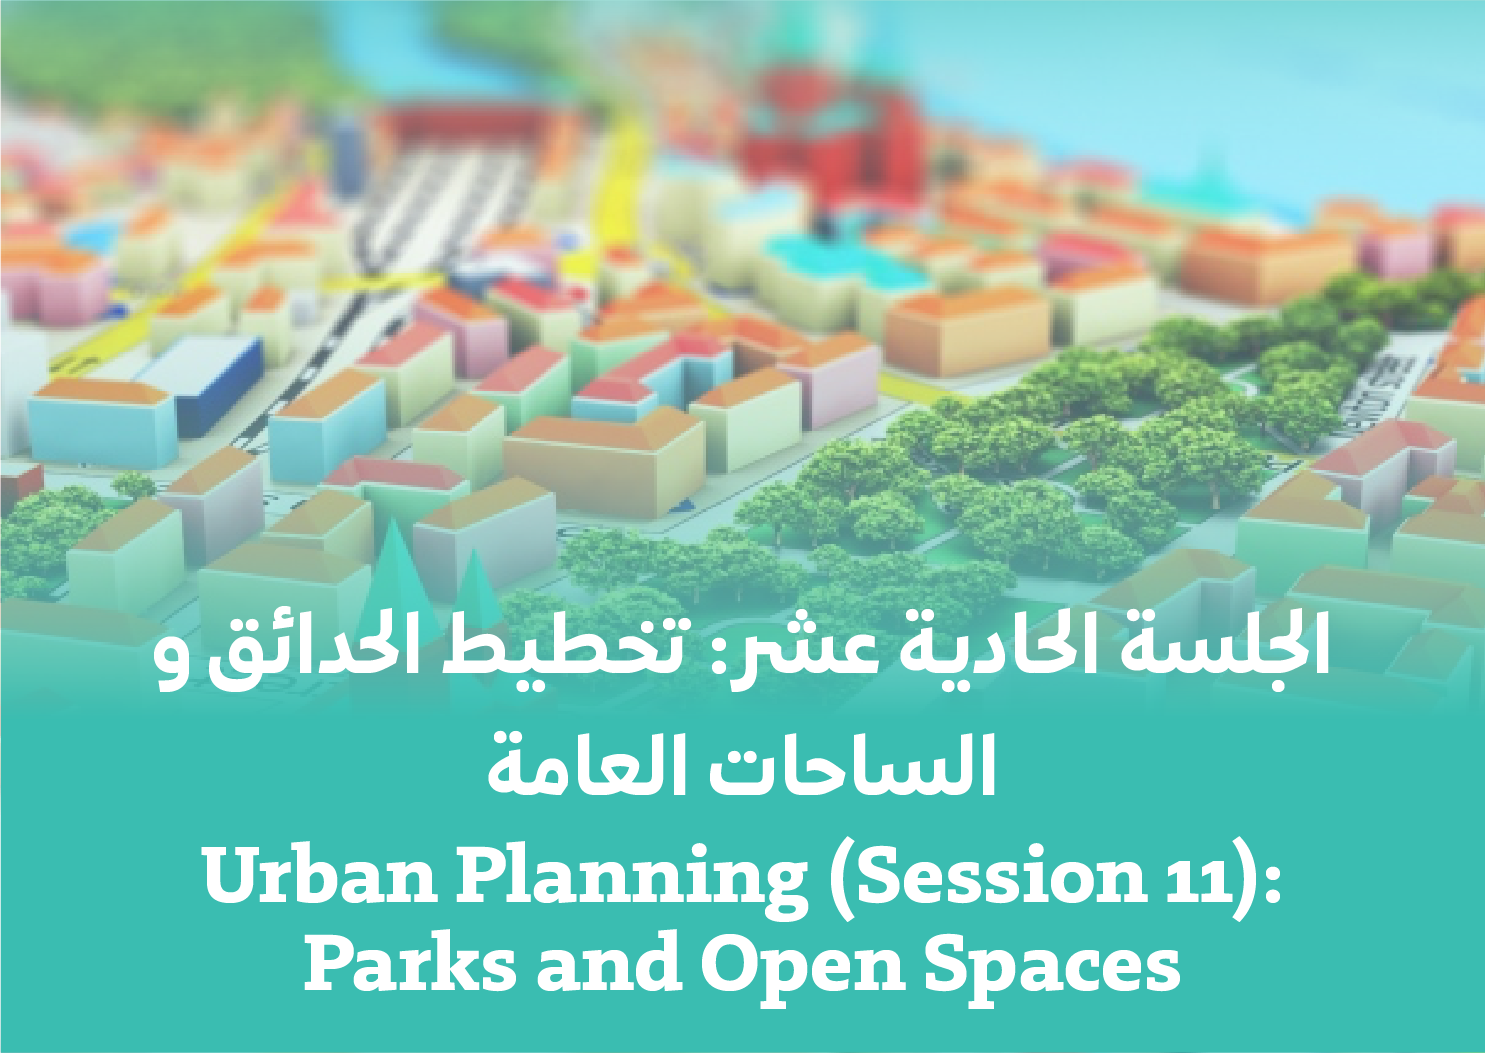 Session 11: Parks and Open Space Planning